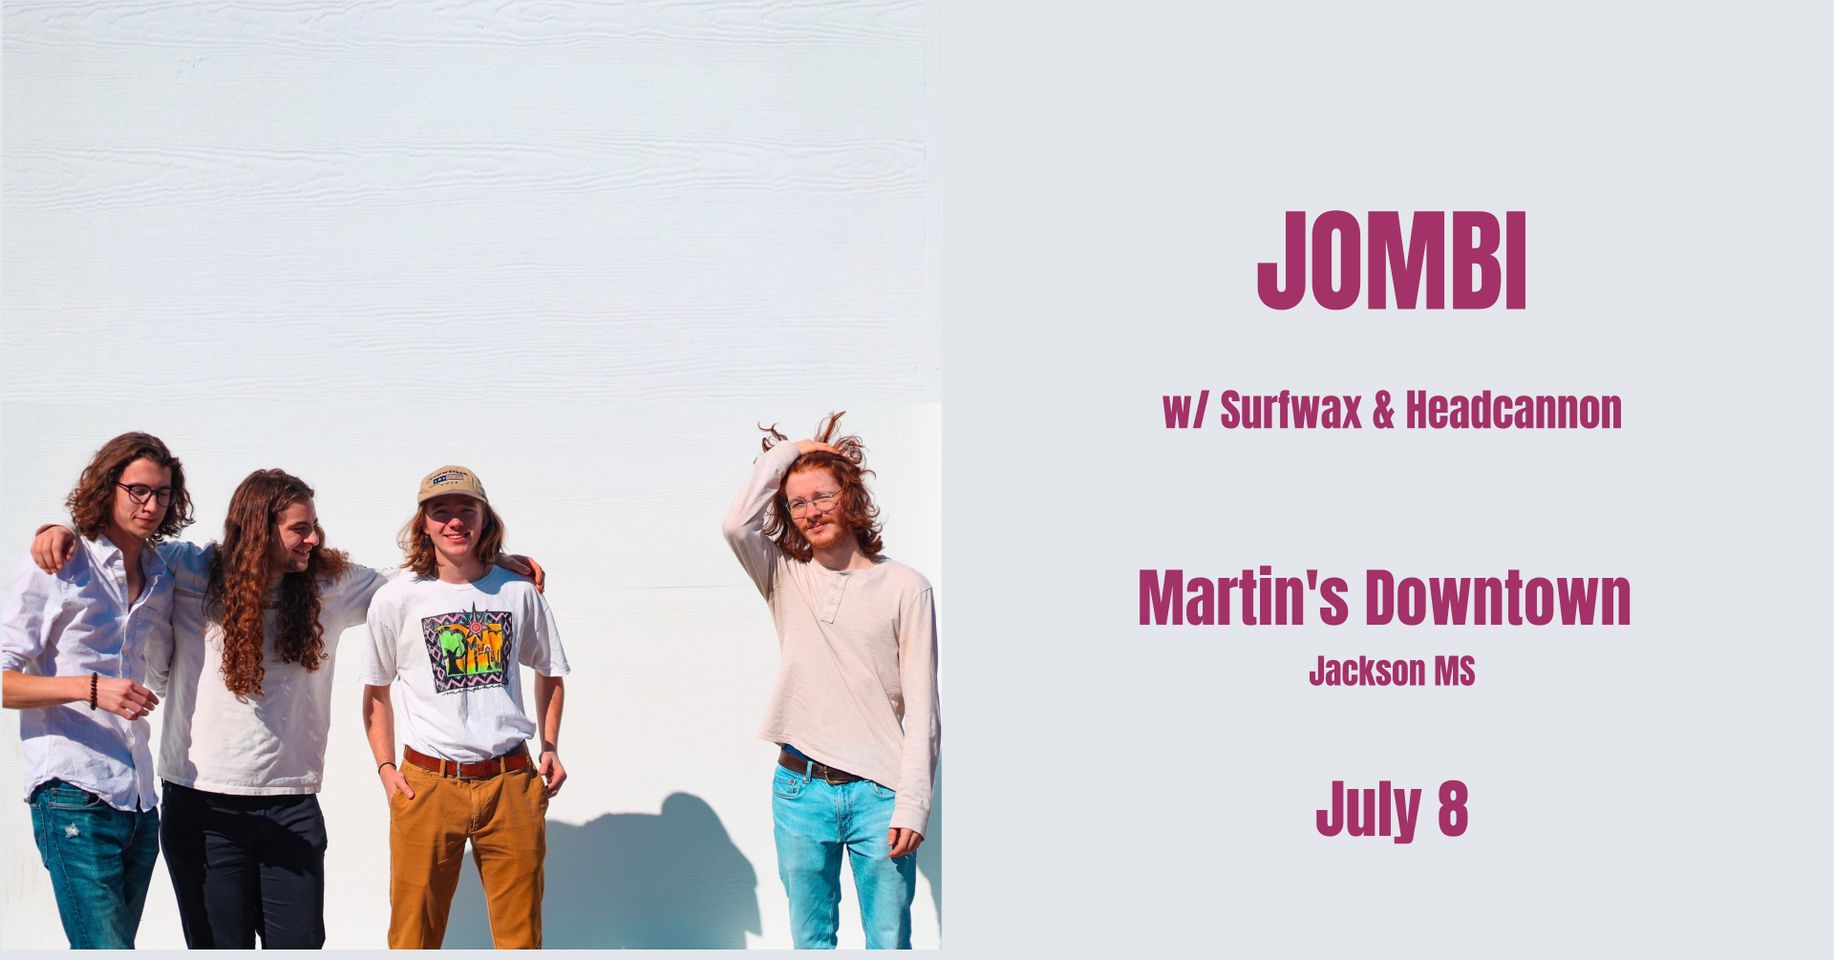 Jombi w/ Surfwax and Headcannon at Martin’s Downtown